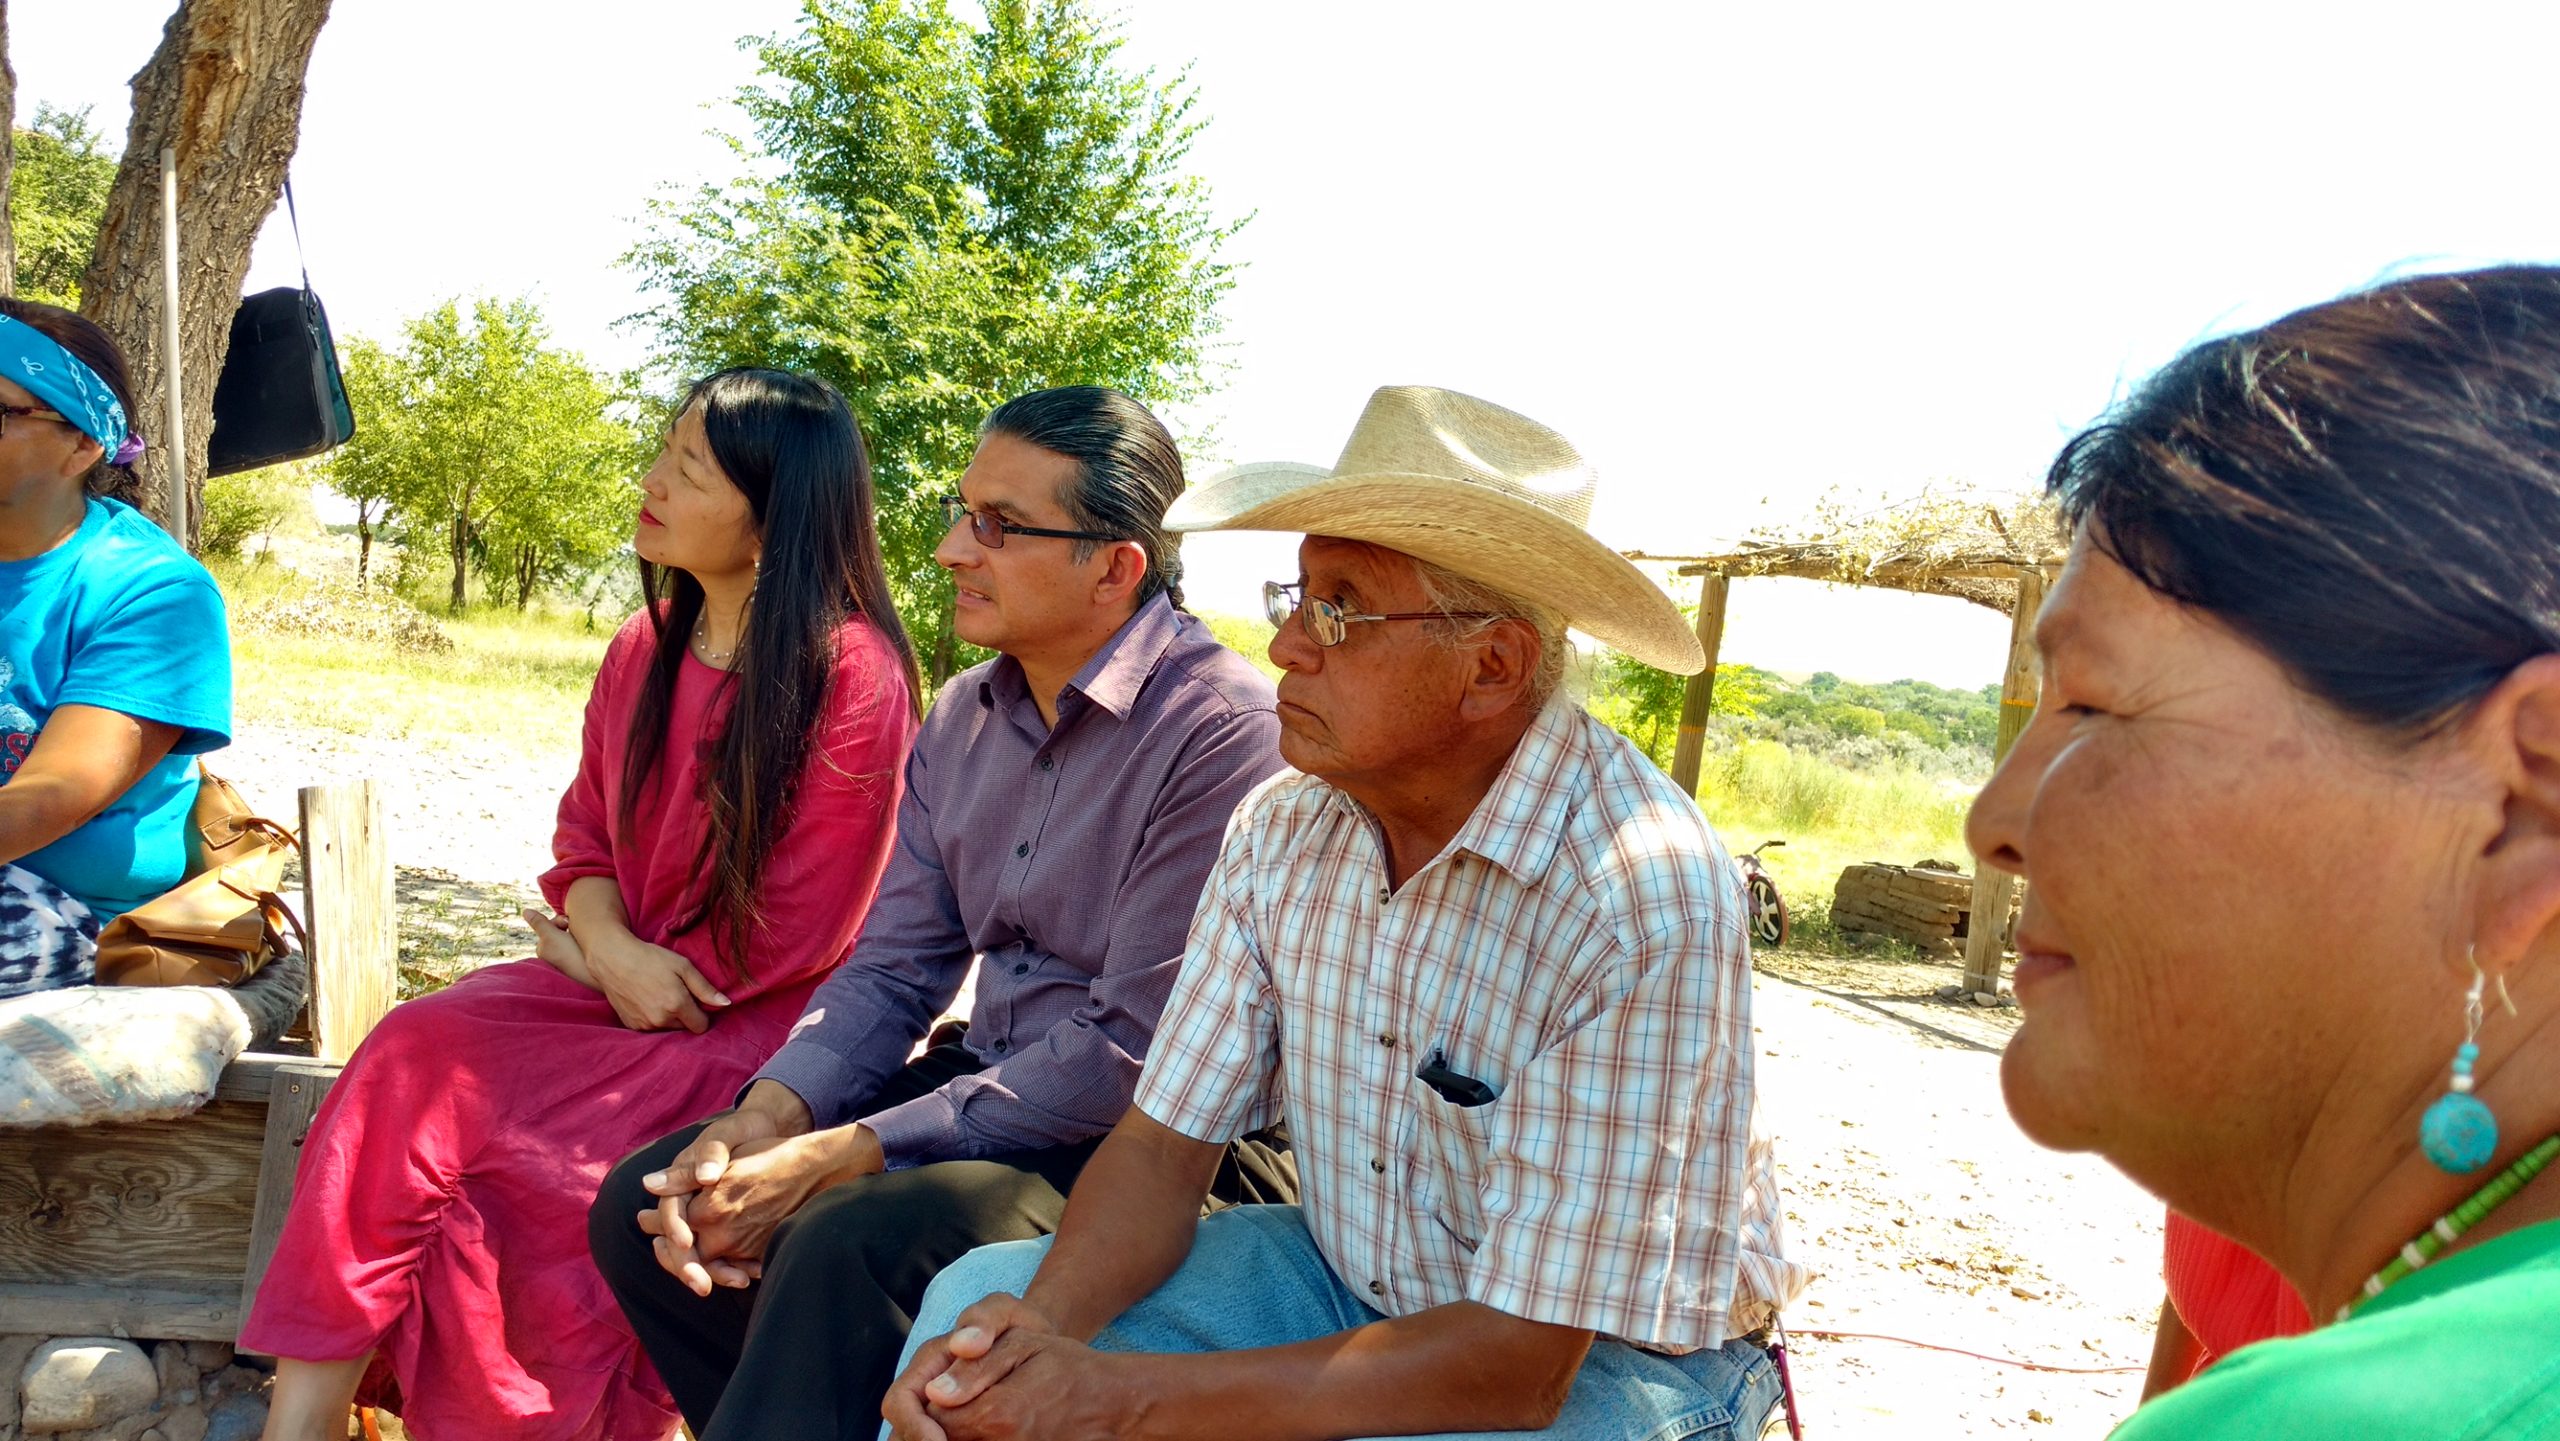 A picture of members of the Navajo nation sitting outside.